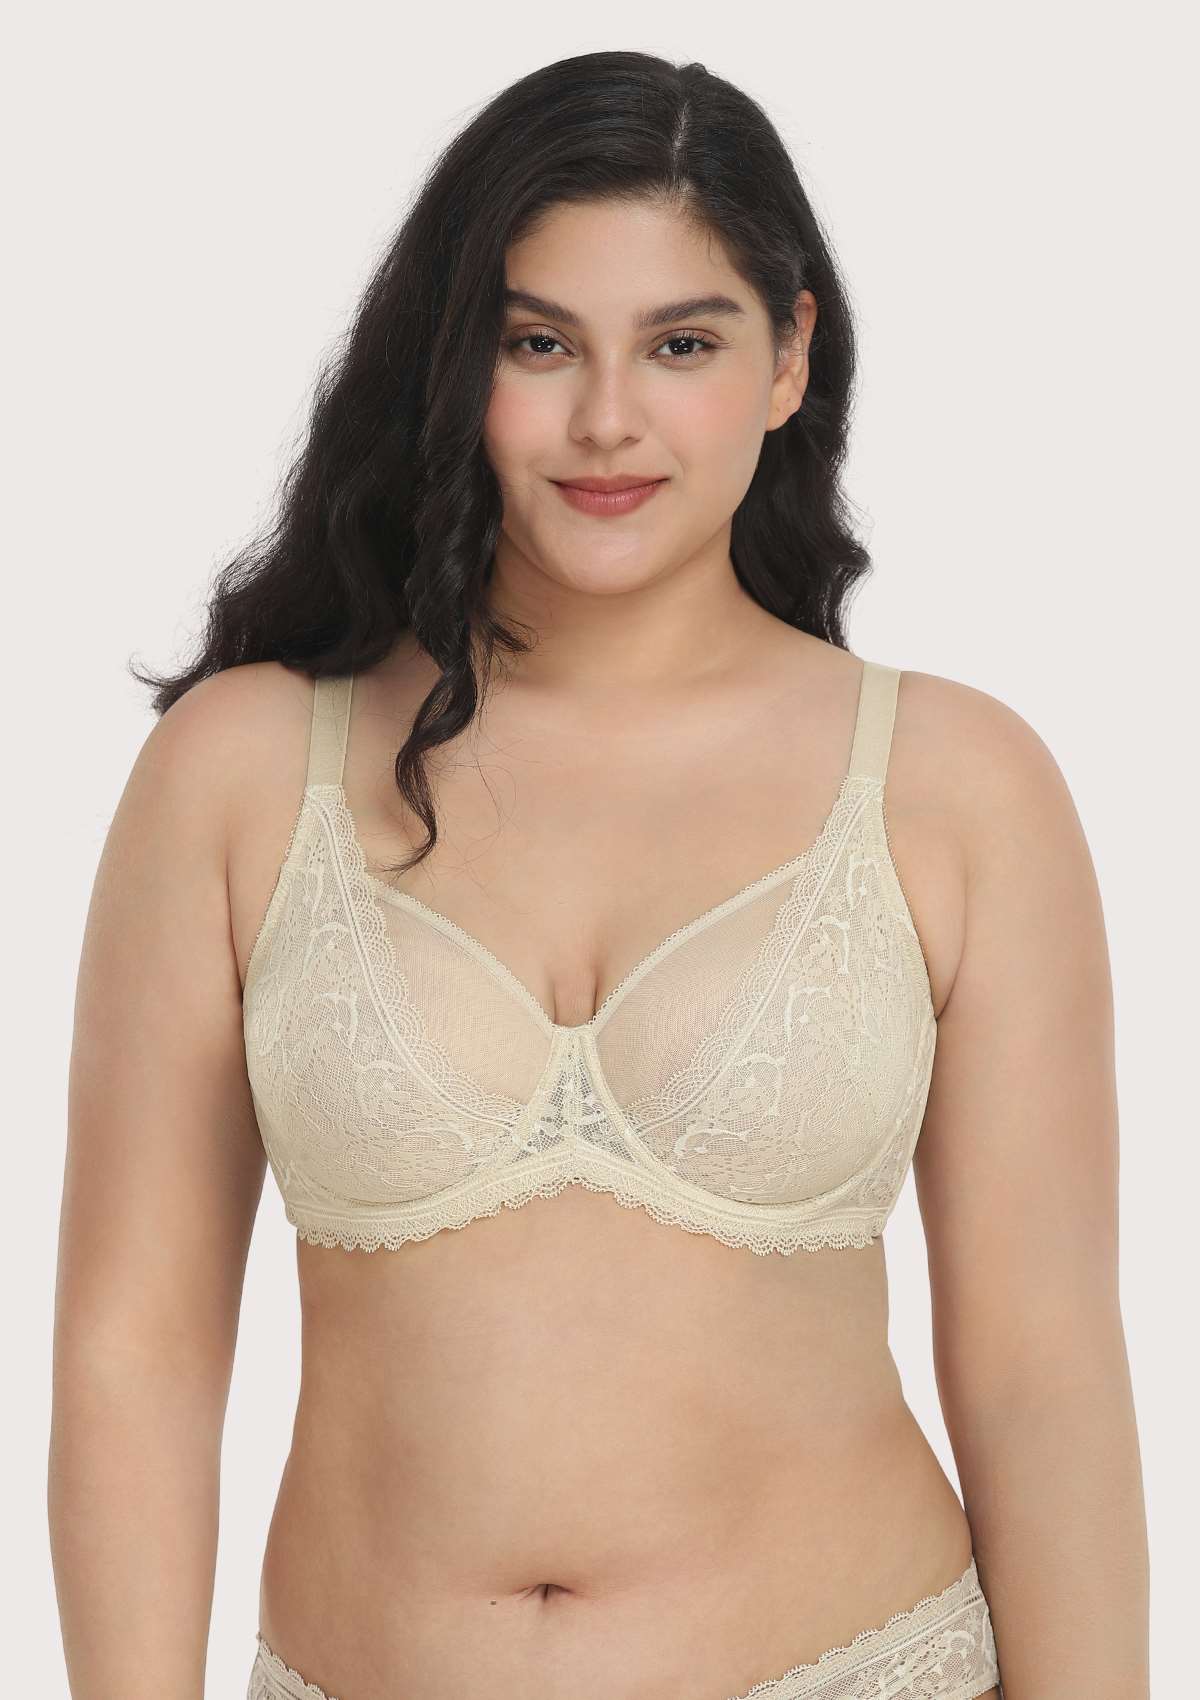 HSIA Anemone Lace Unlined Bra: Supportive, Lightweight Bra - Champagne / 36 / D